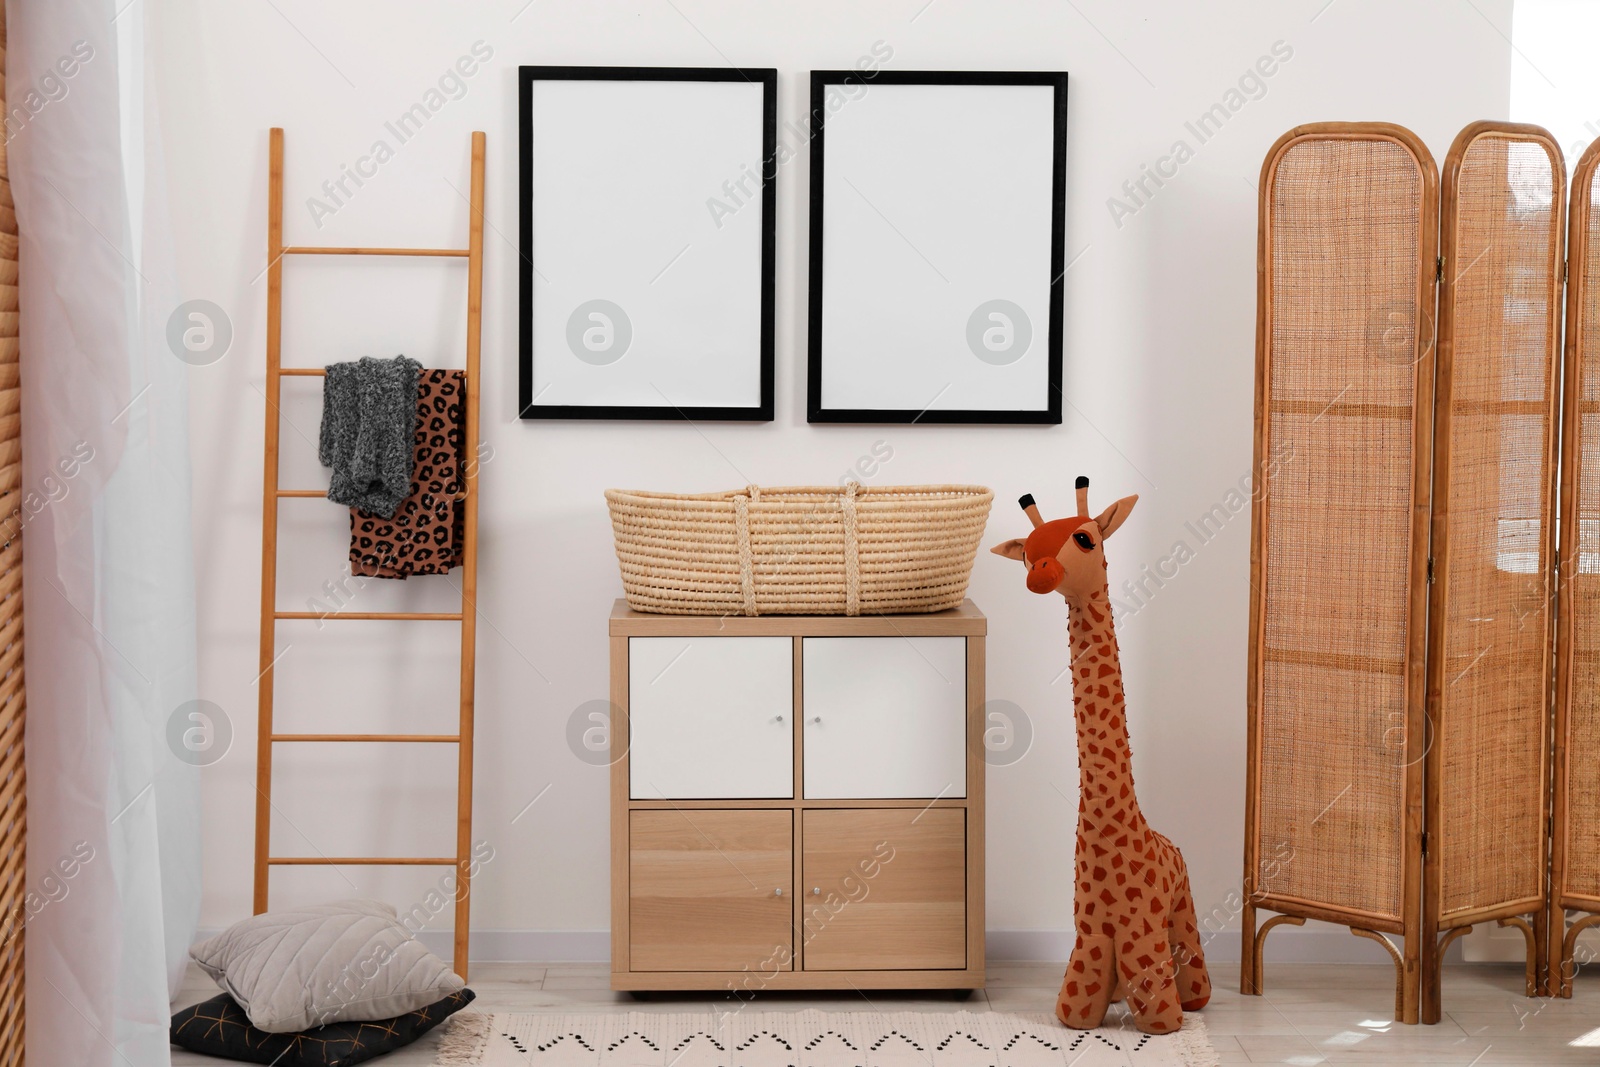 Photo of Child's room interior with modern furniture, toy giraffe and empty frames on wall